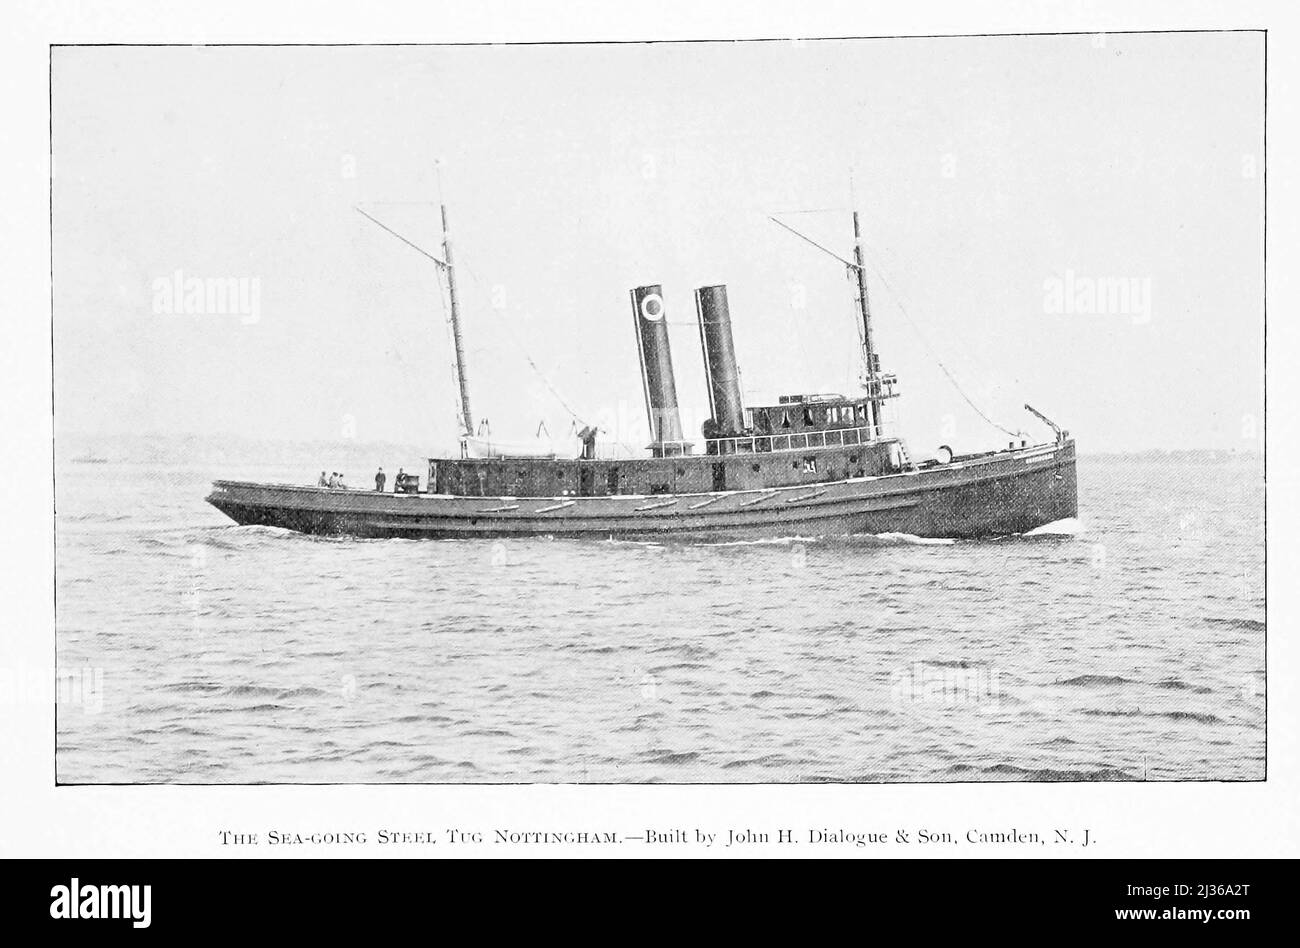 The Sea Going Tug Nottingham Built by John H. Dialogue and Sons, Camden NJ from the book ' Steam vessels and marine engines ' by G. Foster Howell, Publisher New York : American Shipbuilder 1896 Stock Photo